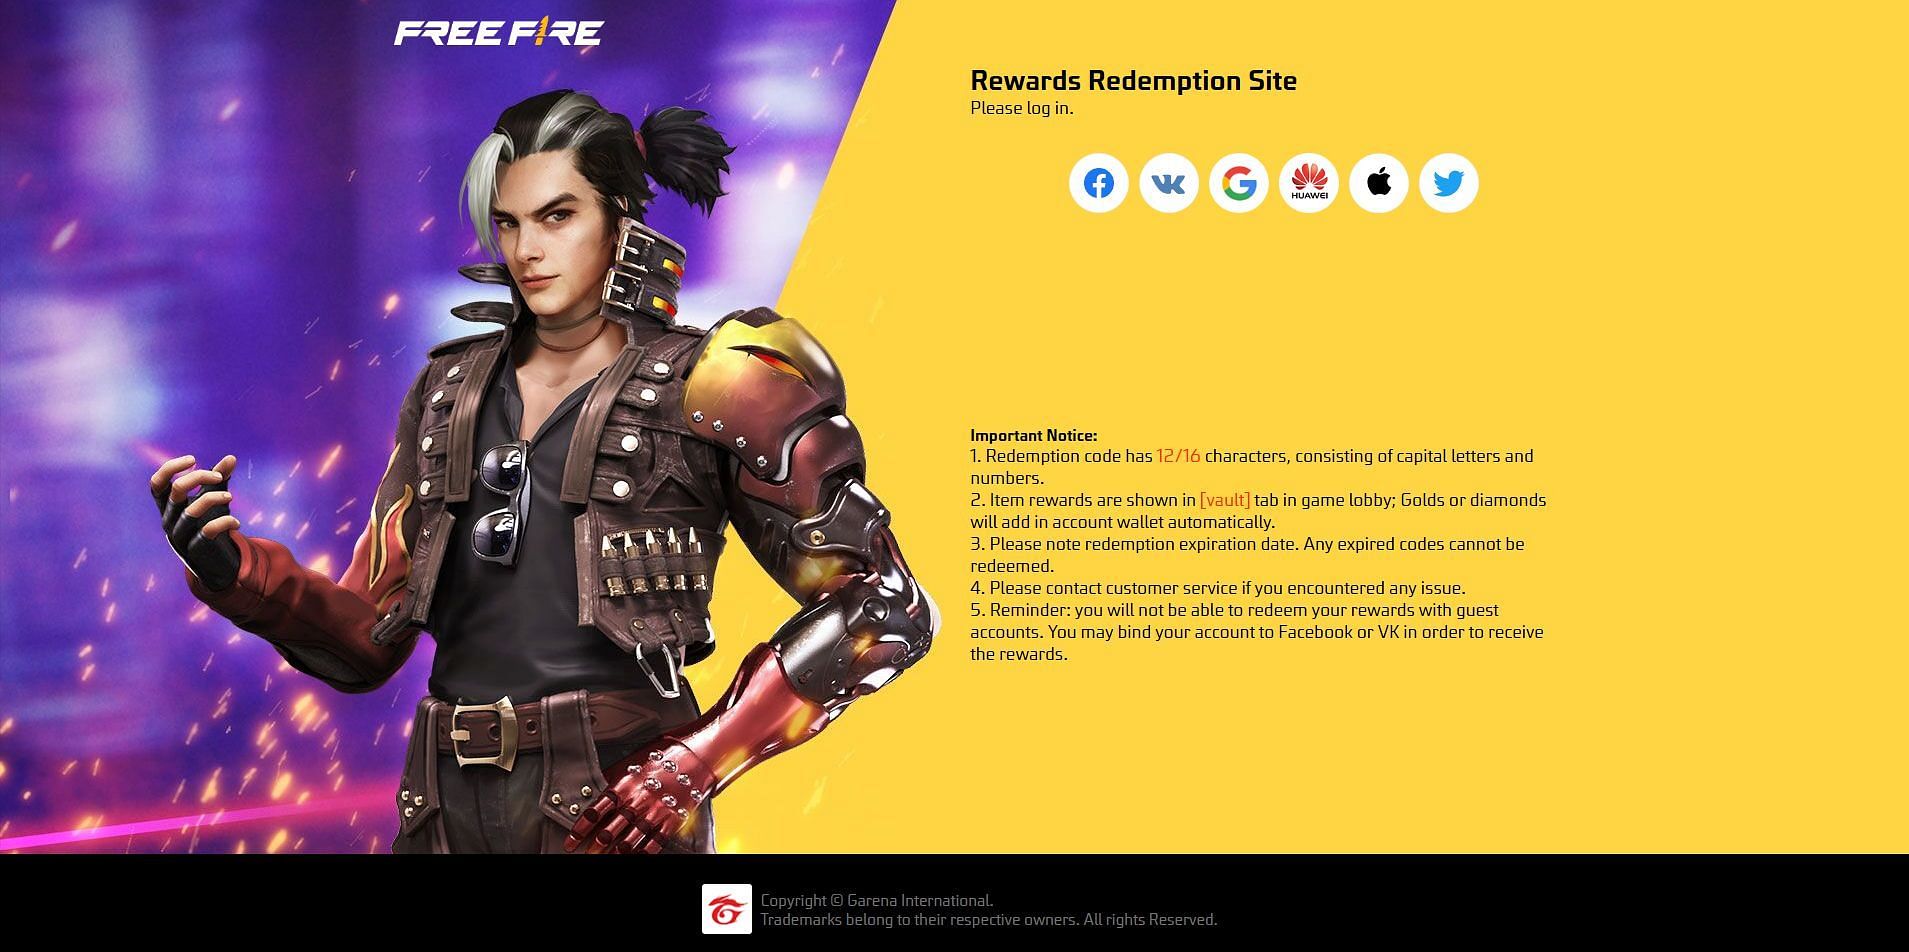 Garena has provided six methods to sign in on the Rewards Redemption Site (Image via Garena)